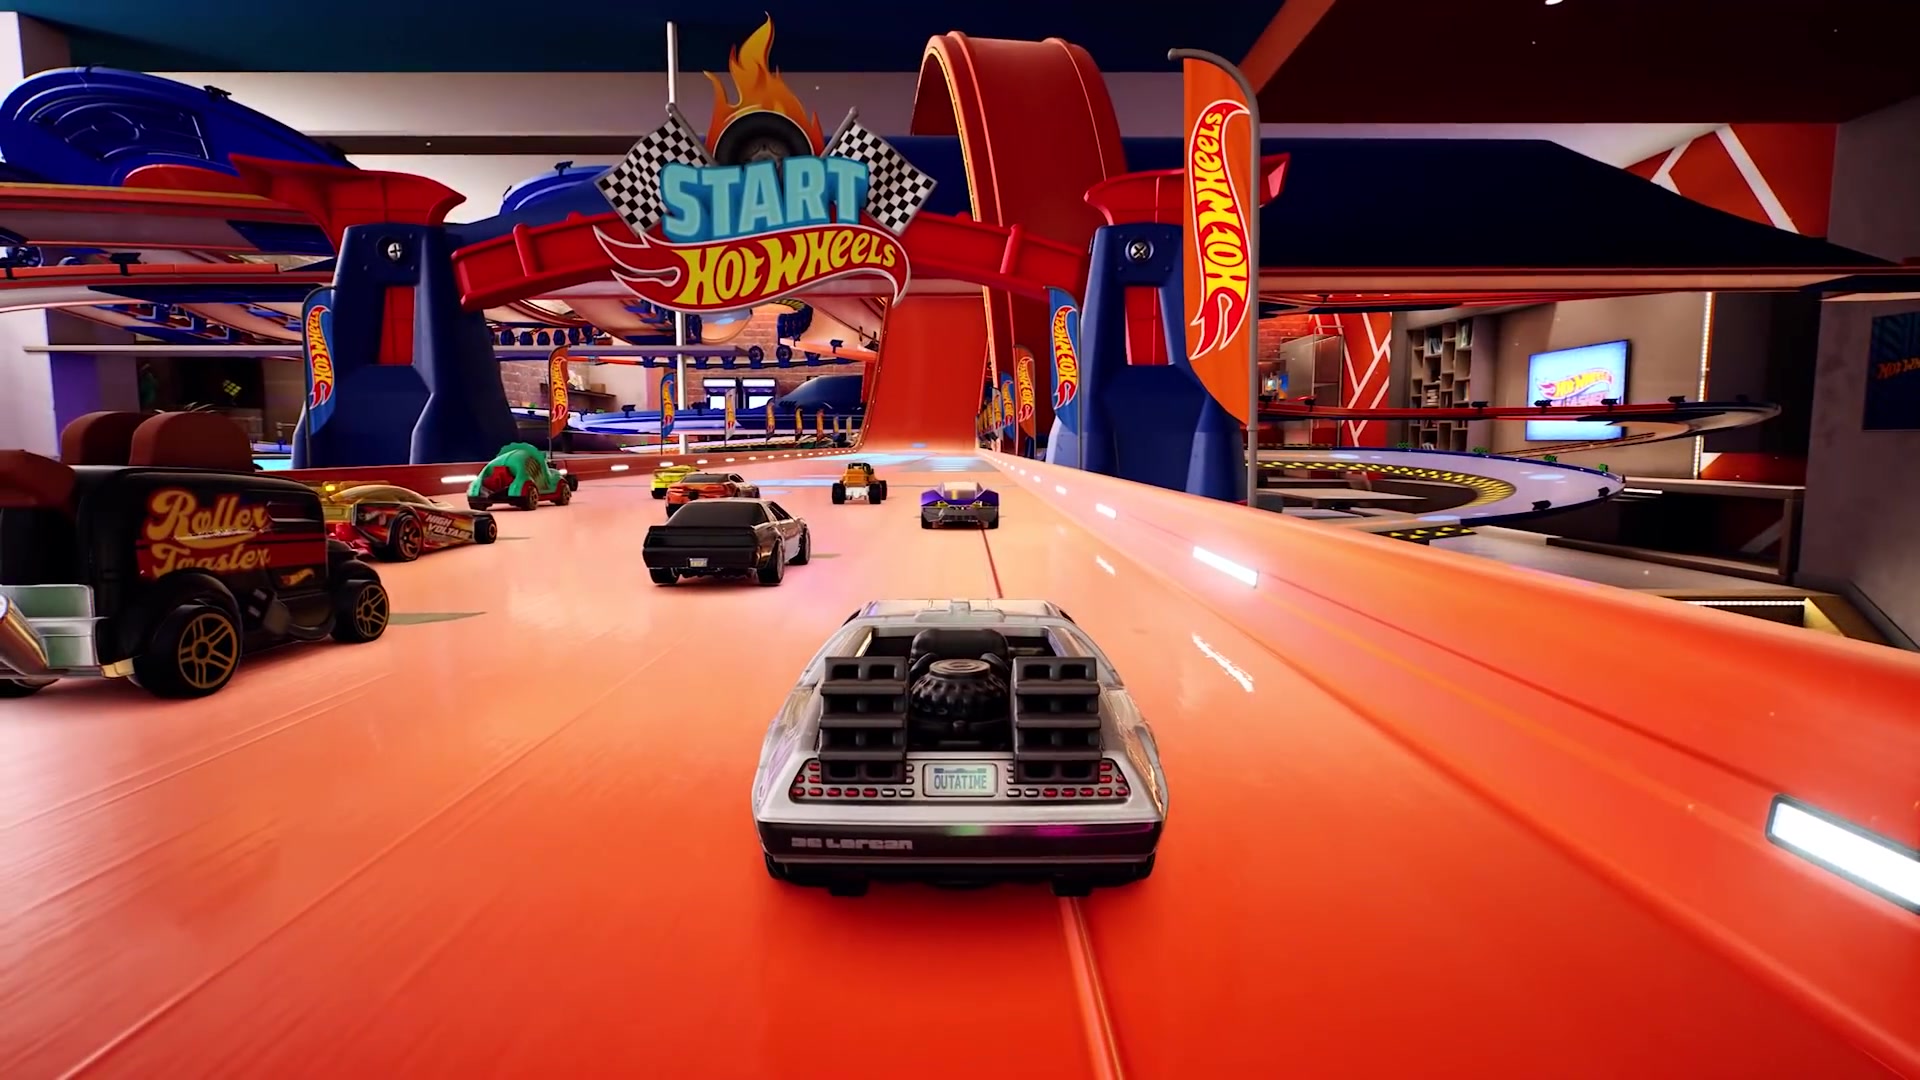 Hot Wheels Unleashed now features cross-platform multiplayer and